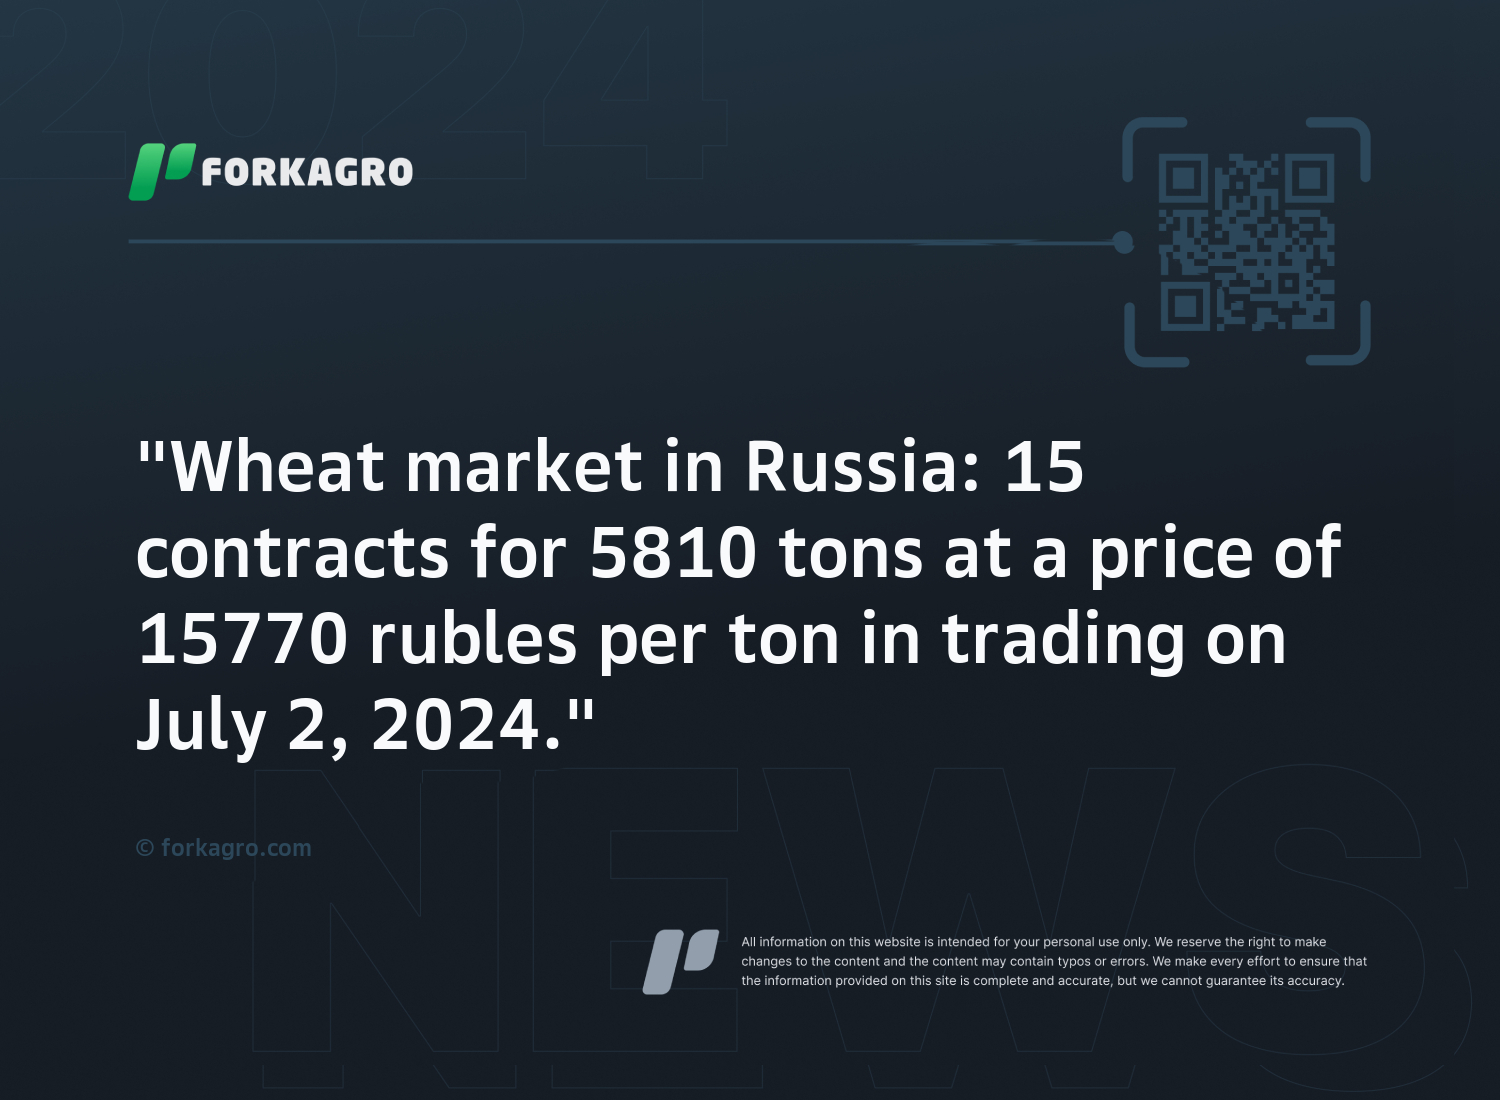 "Wheat market in Russia: 15 contracts for 5810 tons at a price of 15770 rubles per ton in trading on July 2, 2024."